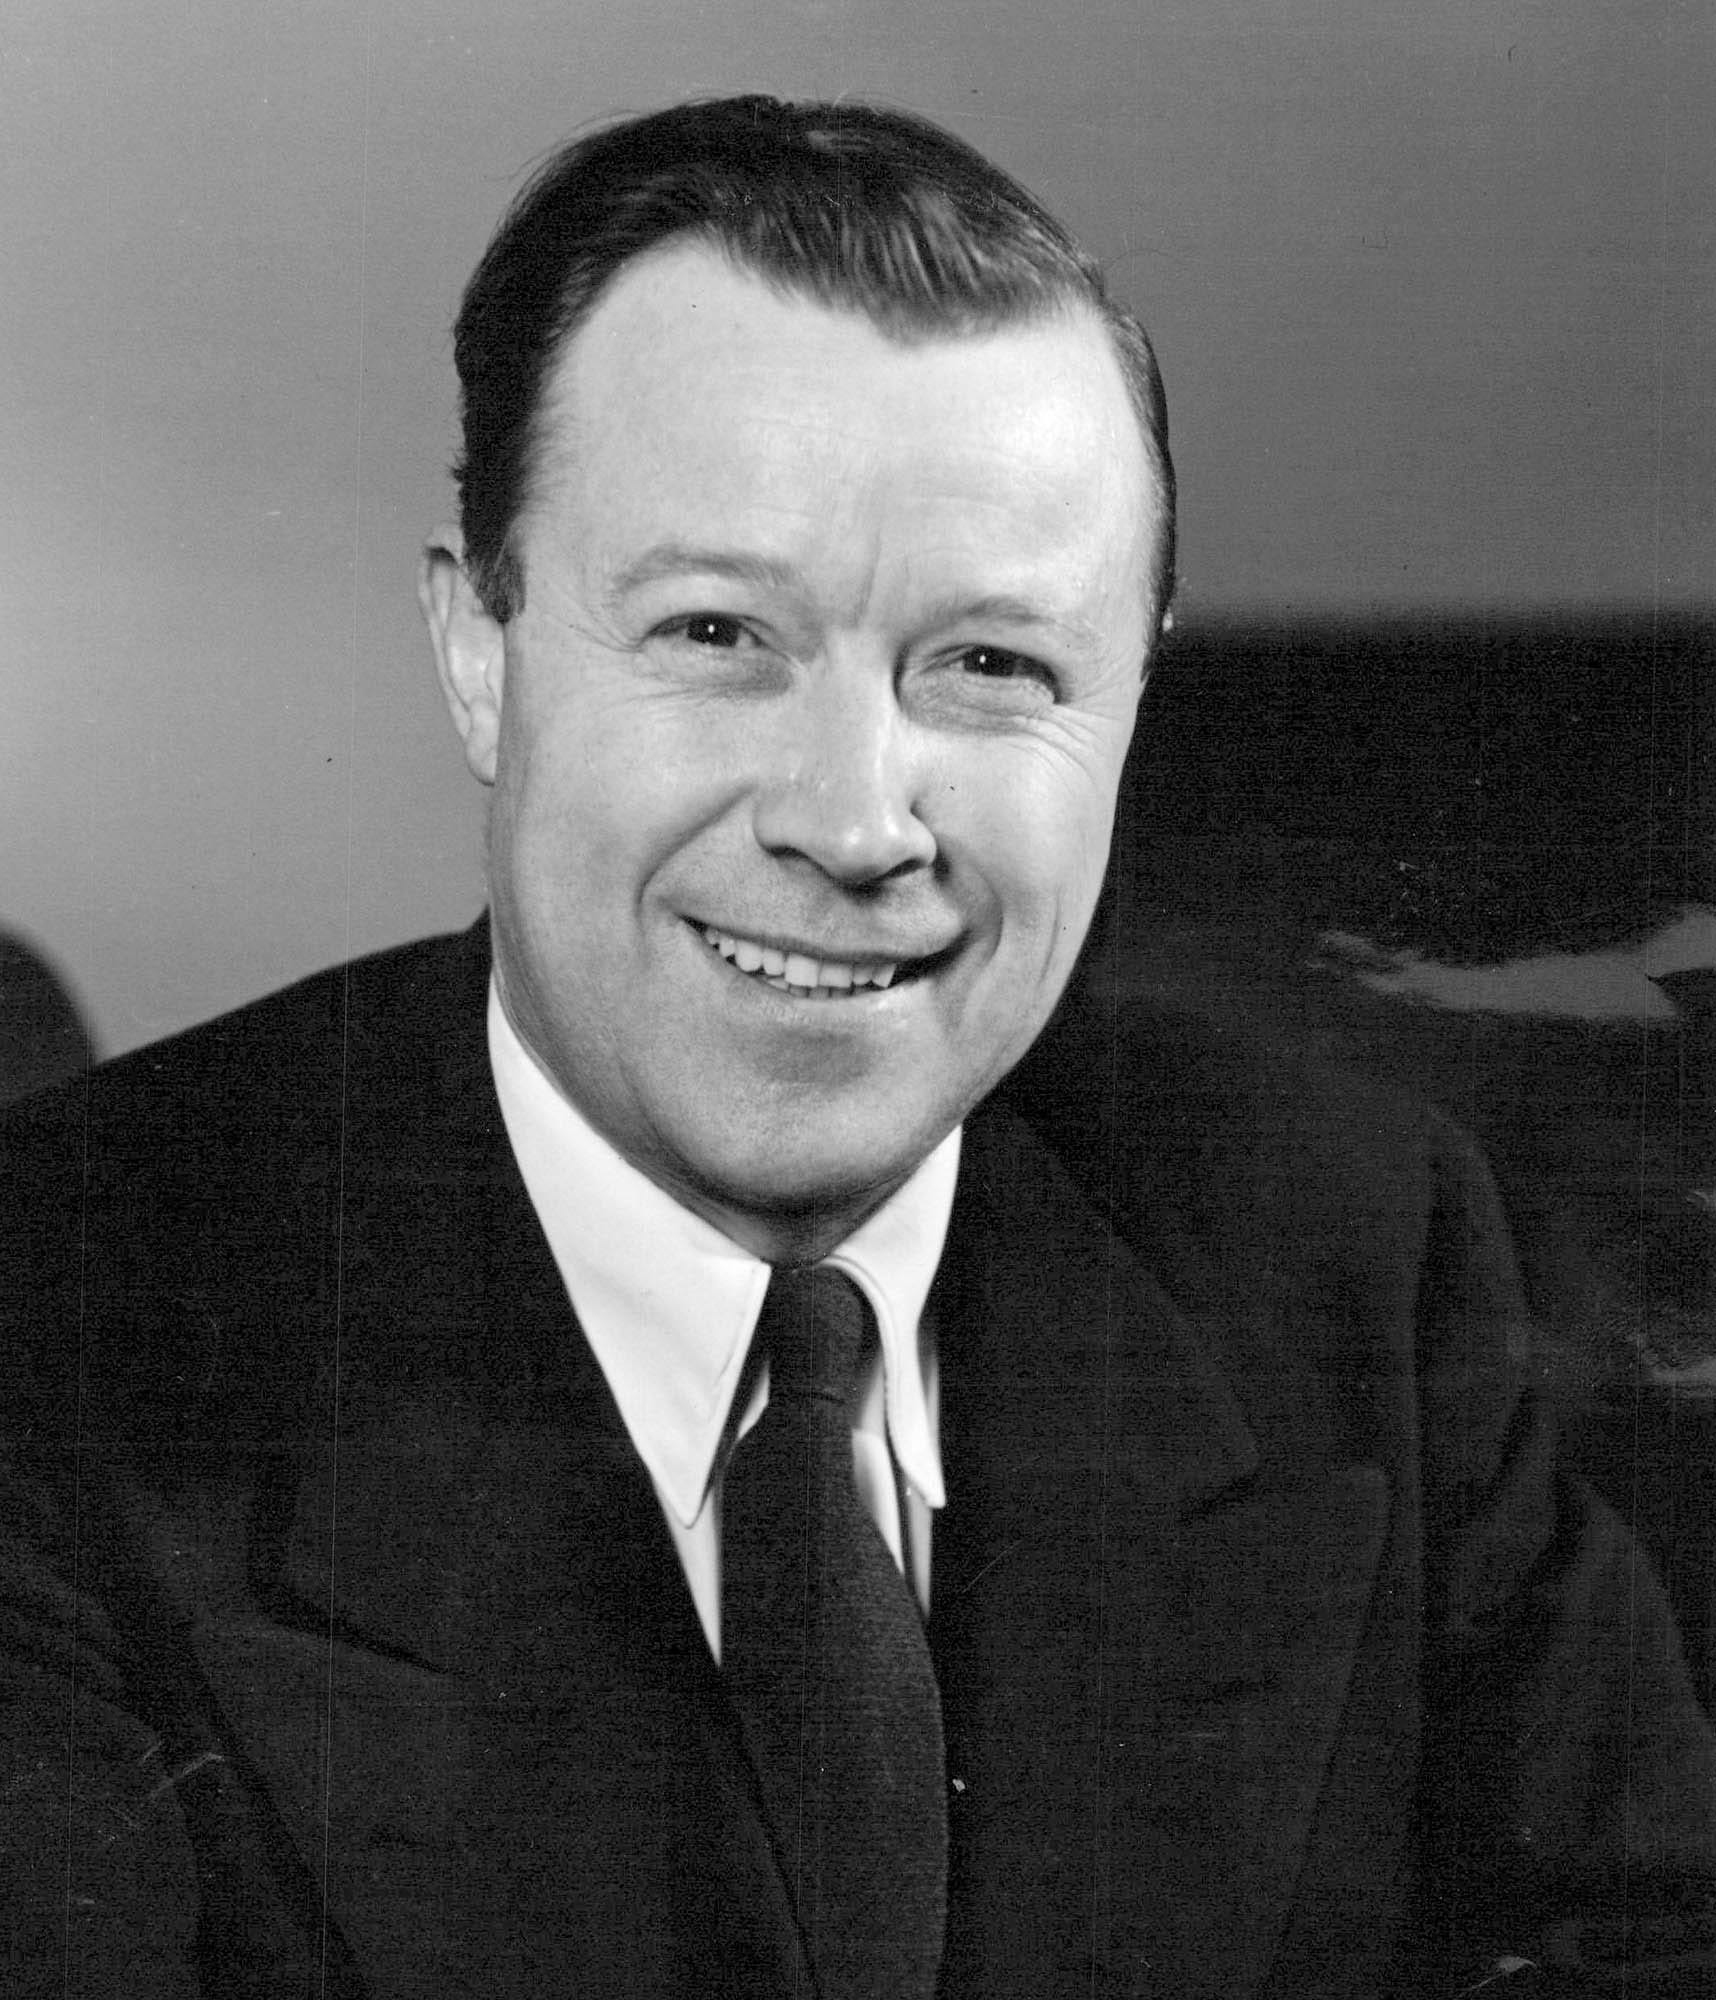 Walter Reuther in 1955